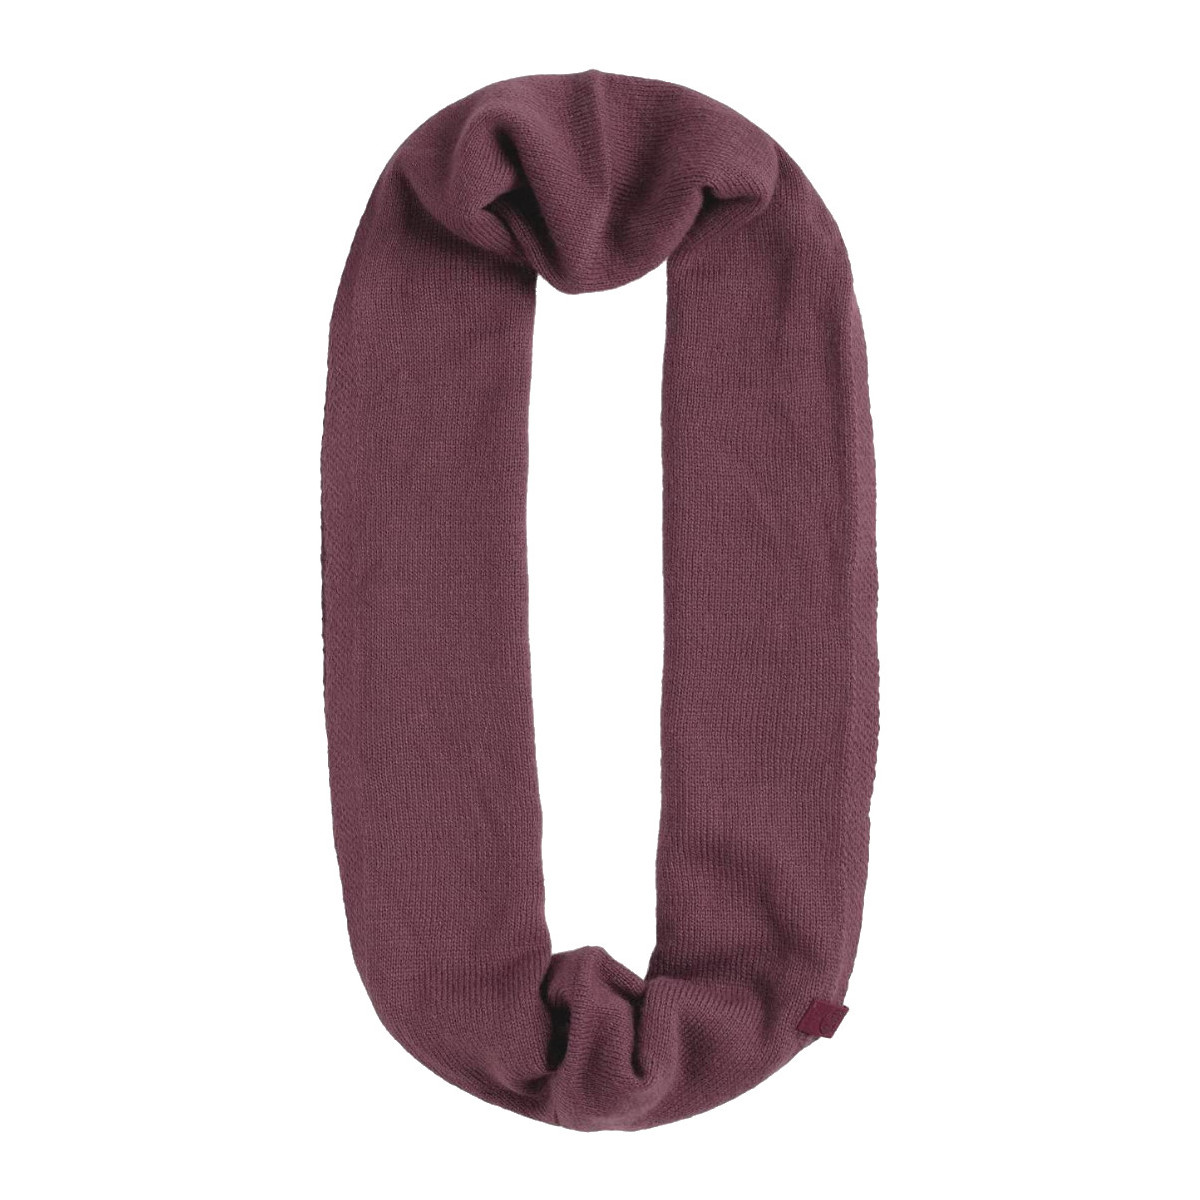 Accessoires textile Femme Echarpes / Etoles / Foulards Buff Yulia Knitted Infinity Scarf Rose